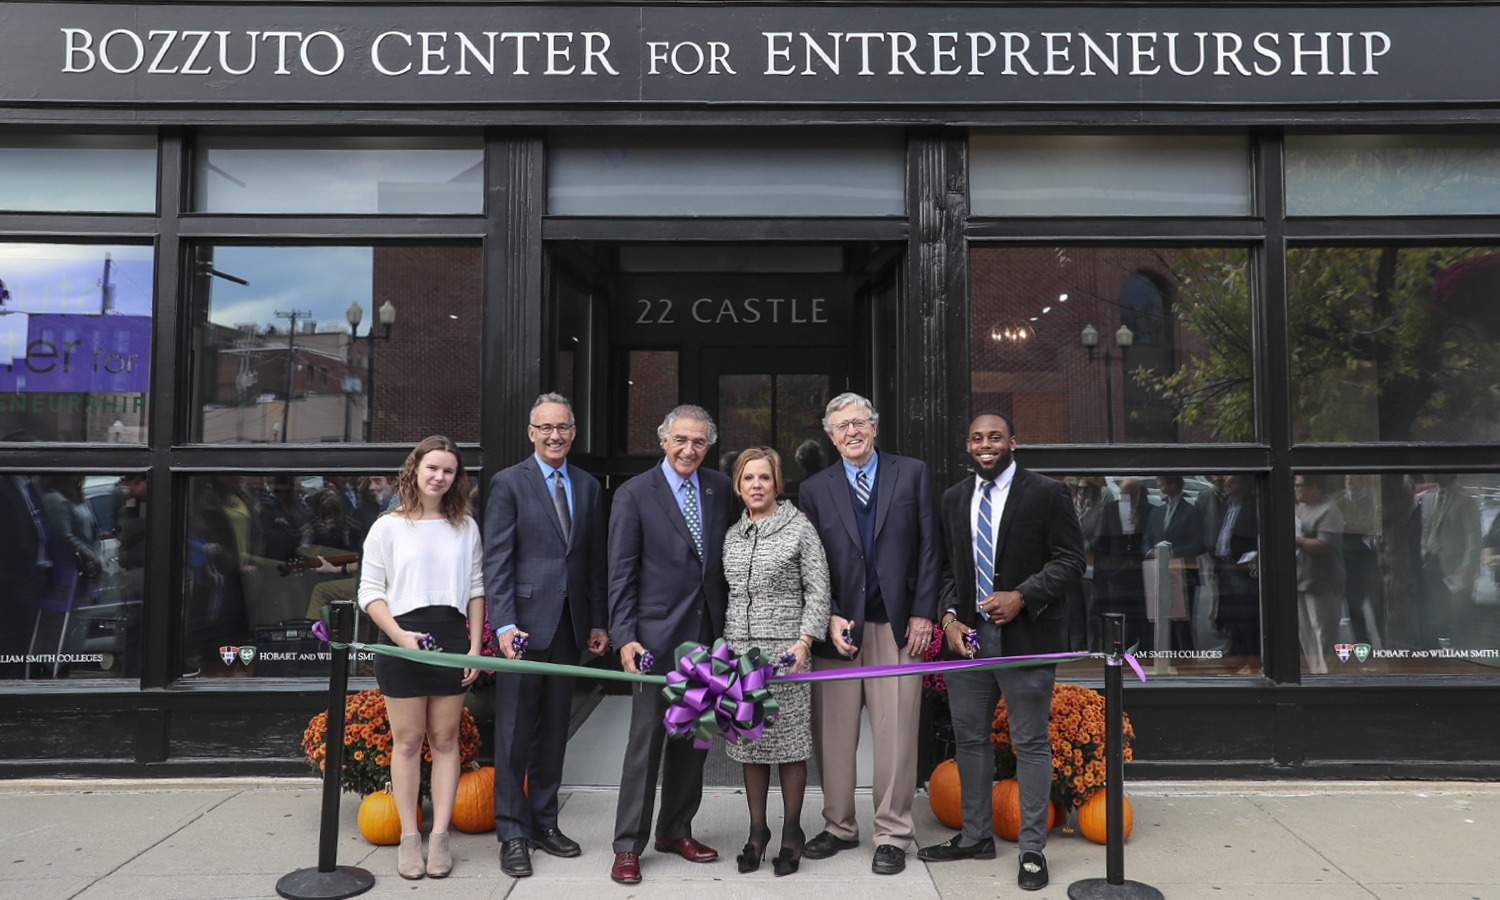 Chloe Elmer '20, Professor of Economics Thomas Drennen, Chair of the Board of Trustees Thomas S. Bozzuto '68 L.H.D. '18, Interim President Patrick A. McGuire L.H.D. '12and Al Smith '19â pose for a photo during the ribbon cutting ceremony as part of the dedication of the new Bozzuto Center for Entrepreneurshipâ in downtown Geneva, N.Y.